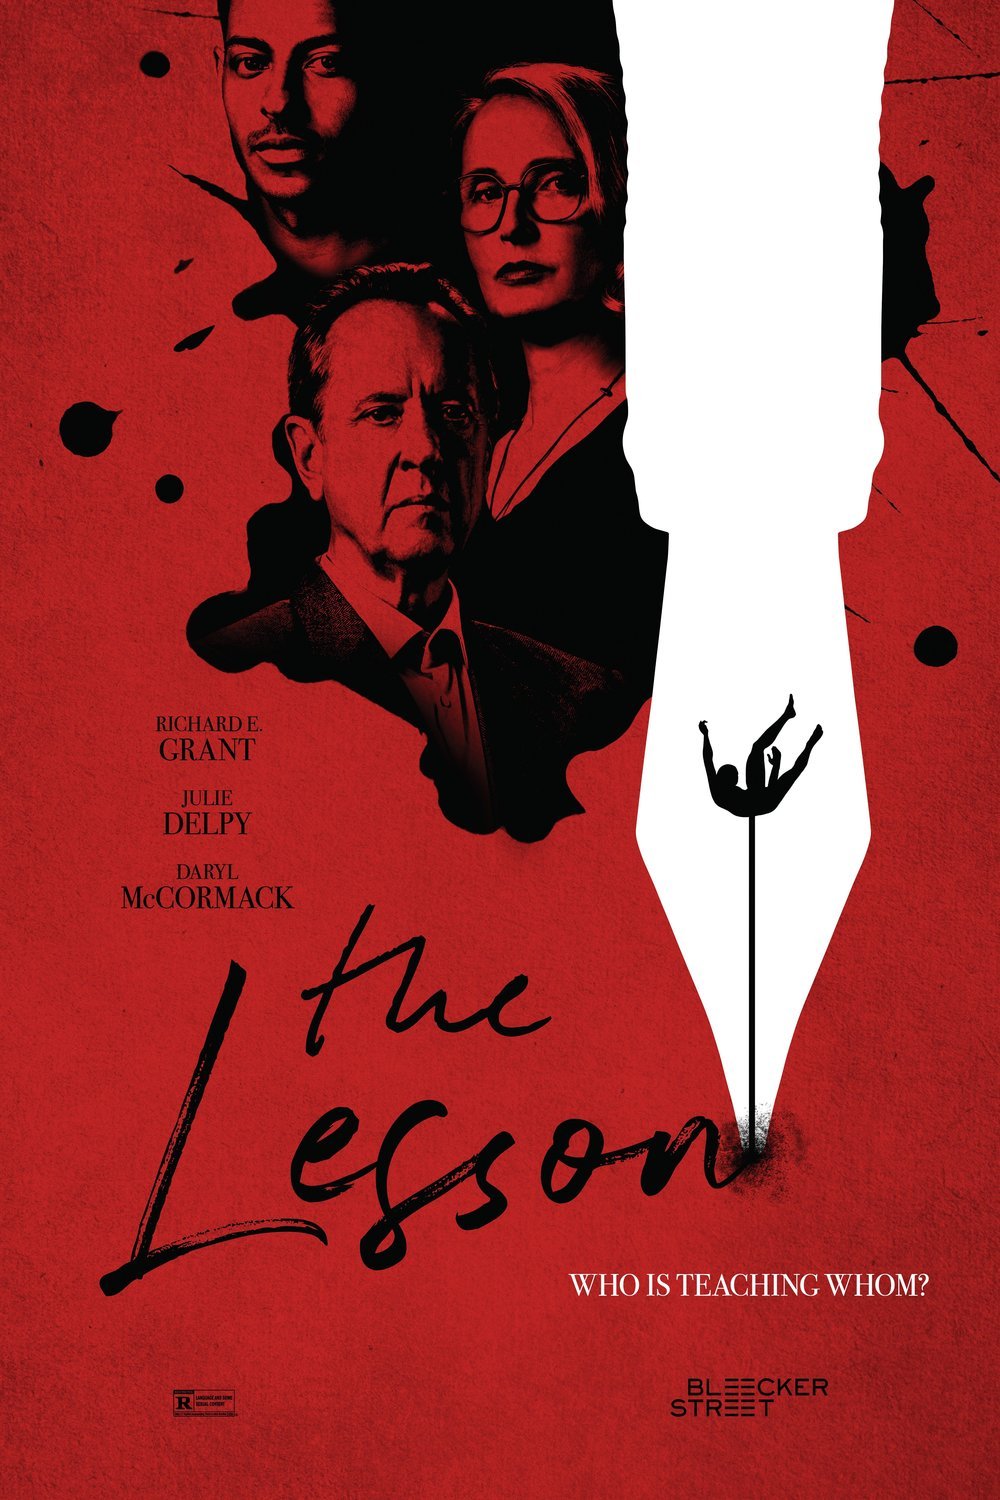 Poster of the movie The Lesson